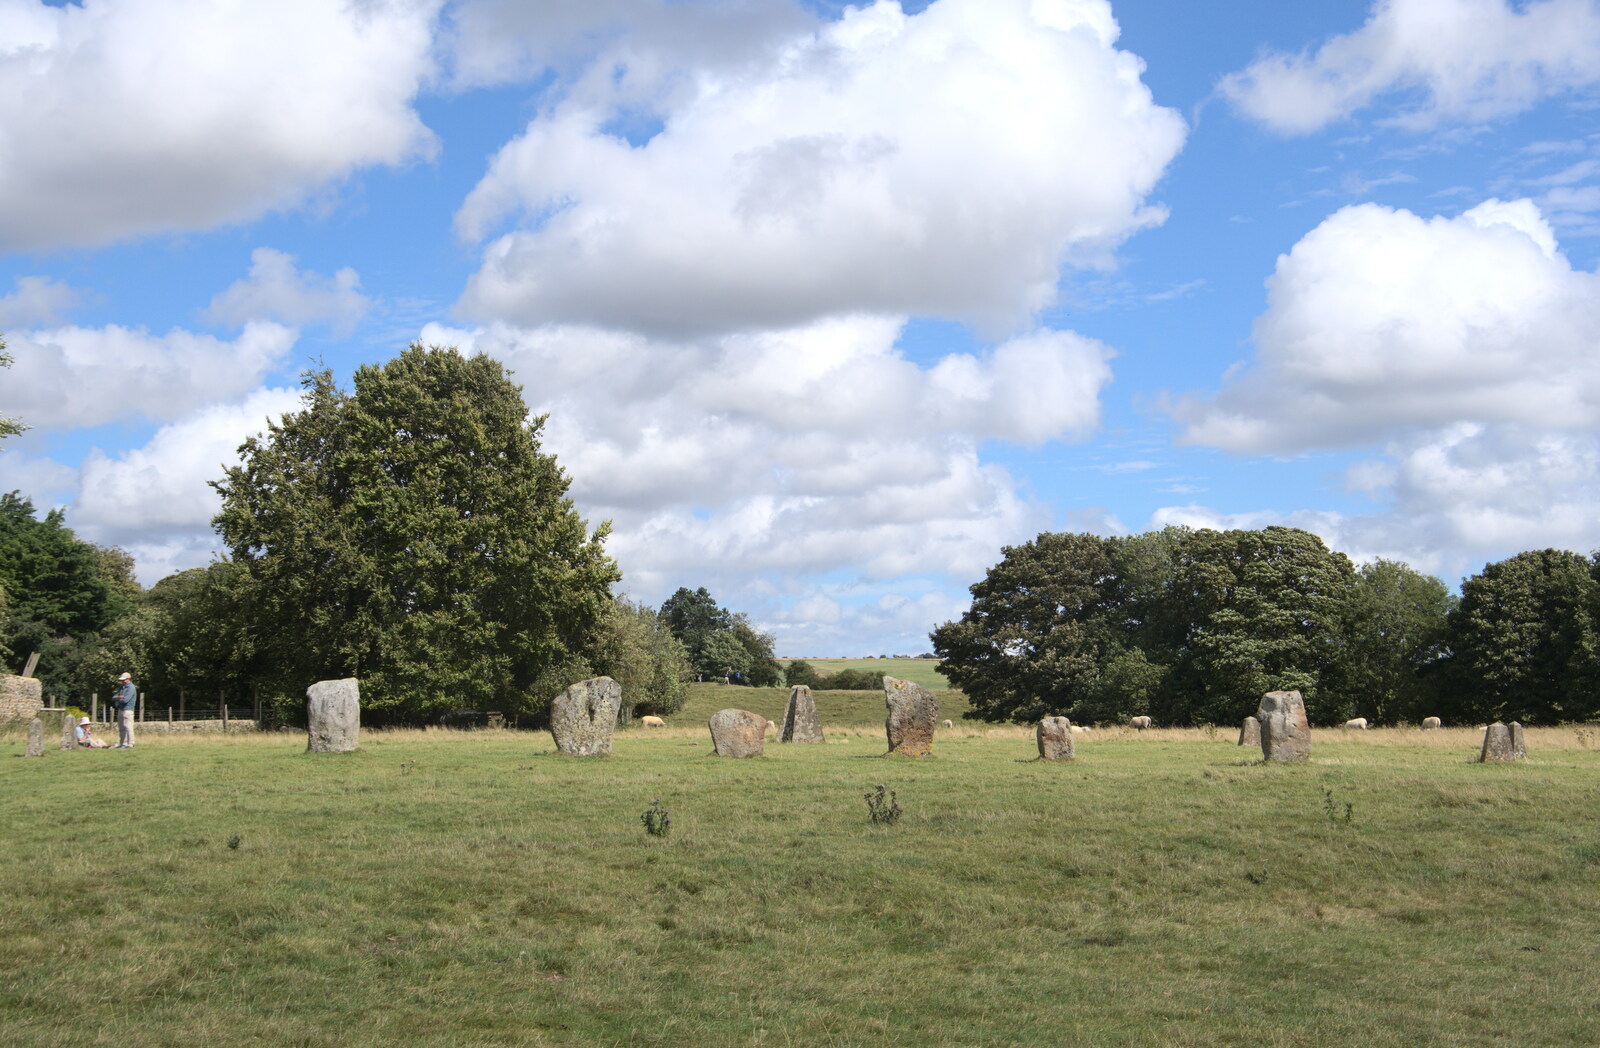 The standing stones of Avebury from Stone Circles: Stonehenge and Avebury, Wiltshire - 22nd August 2020